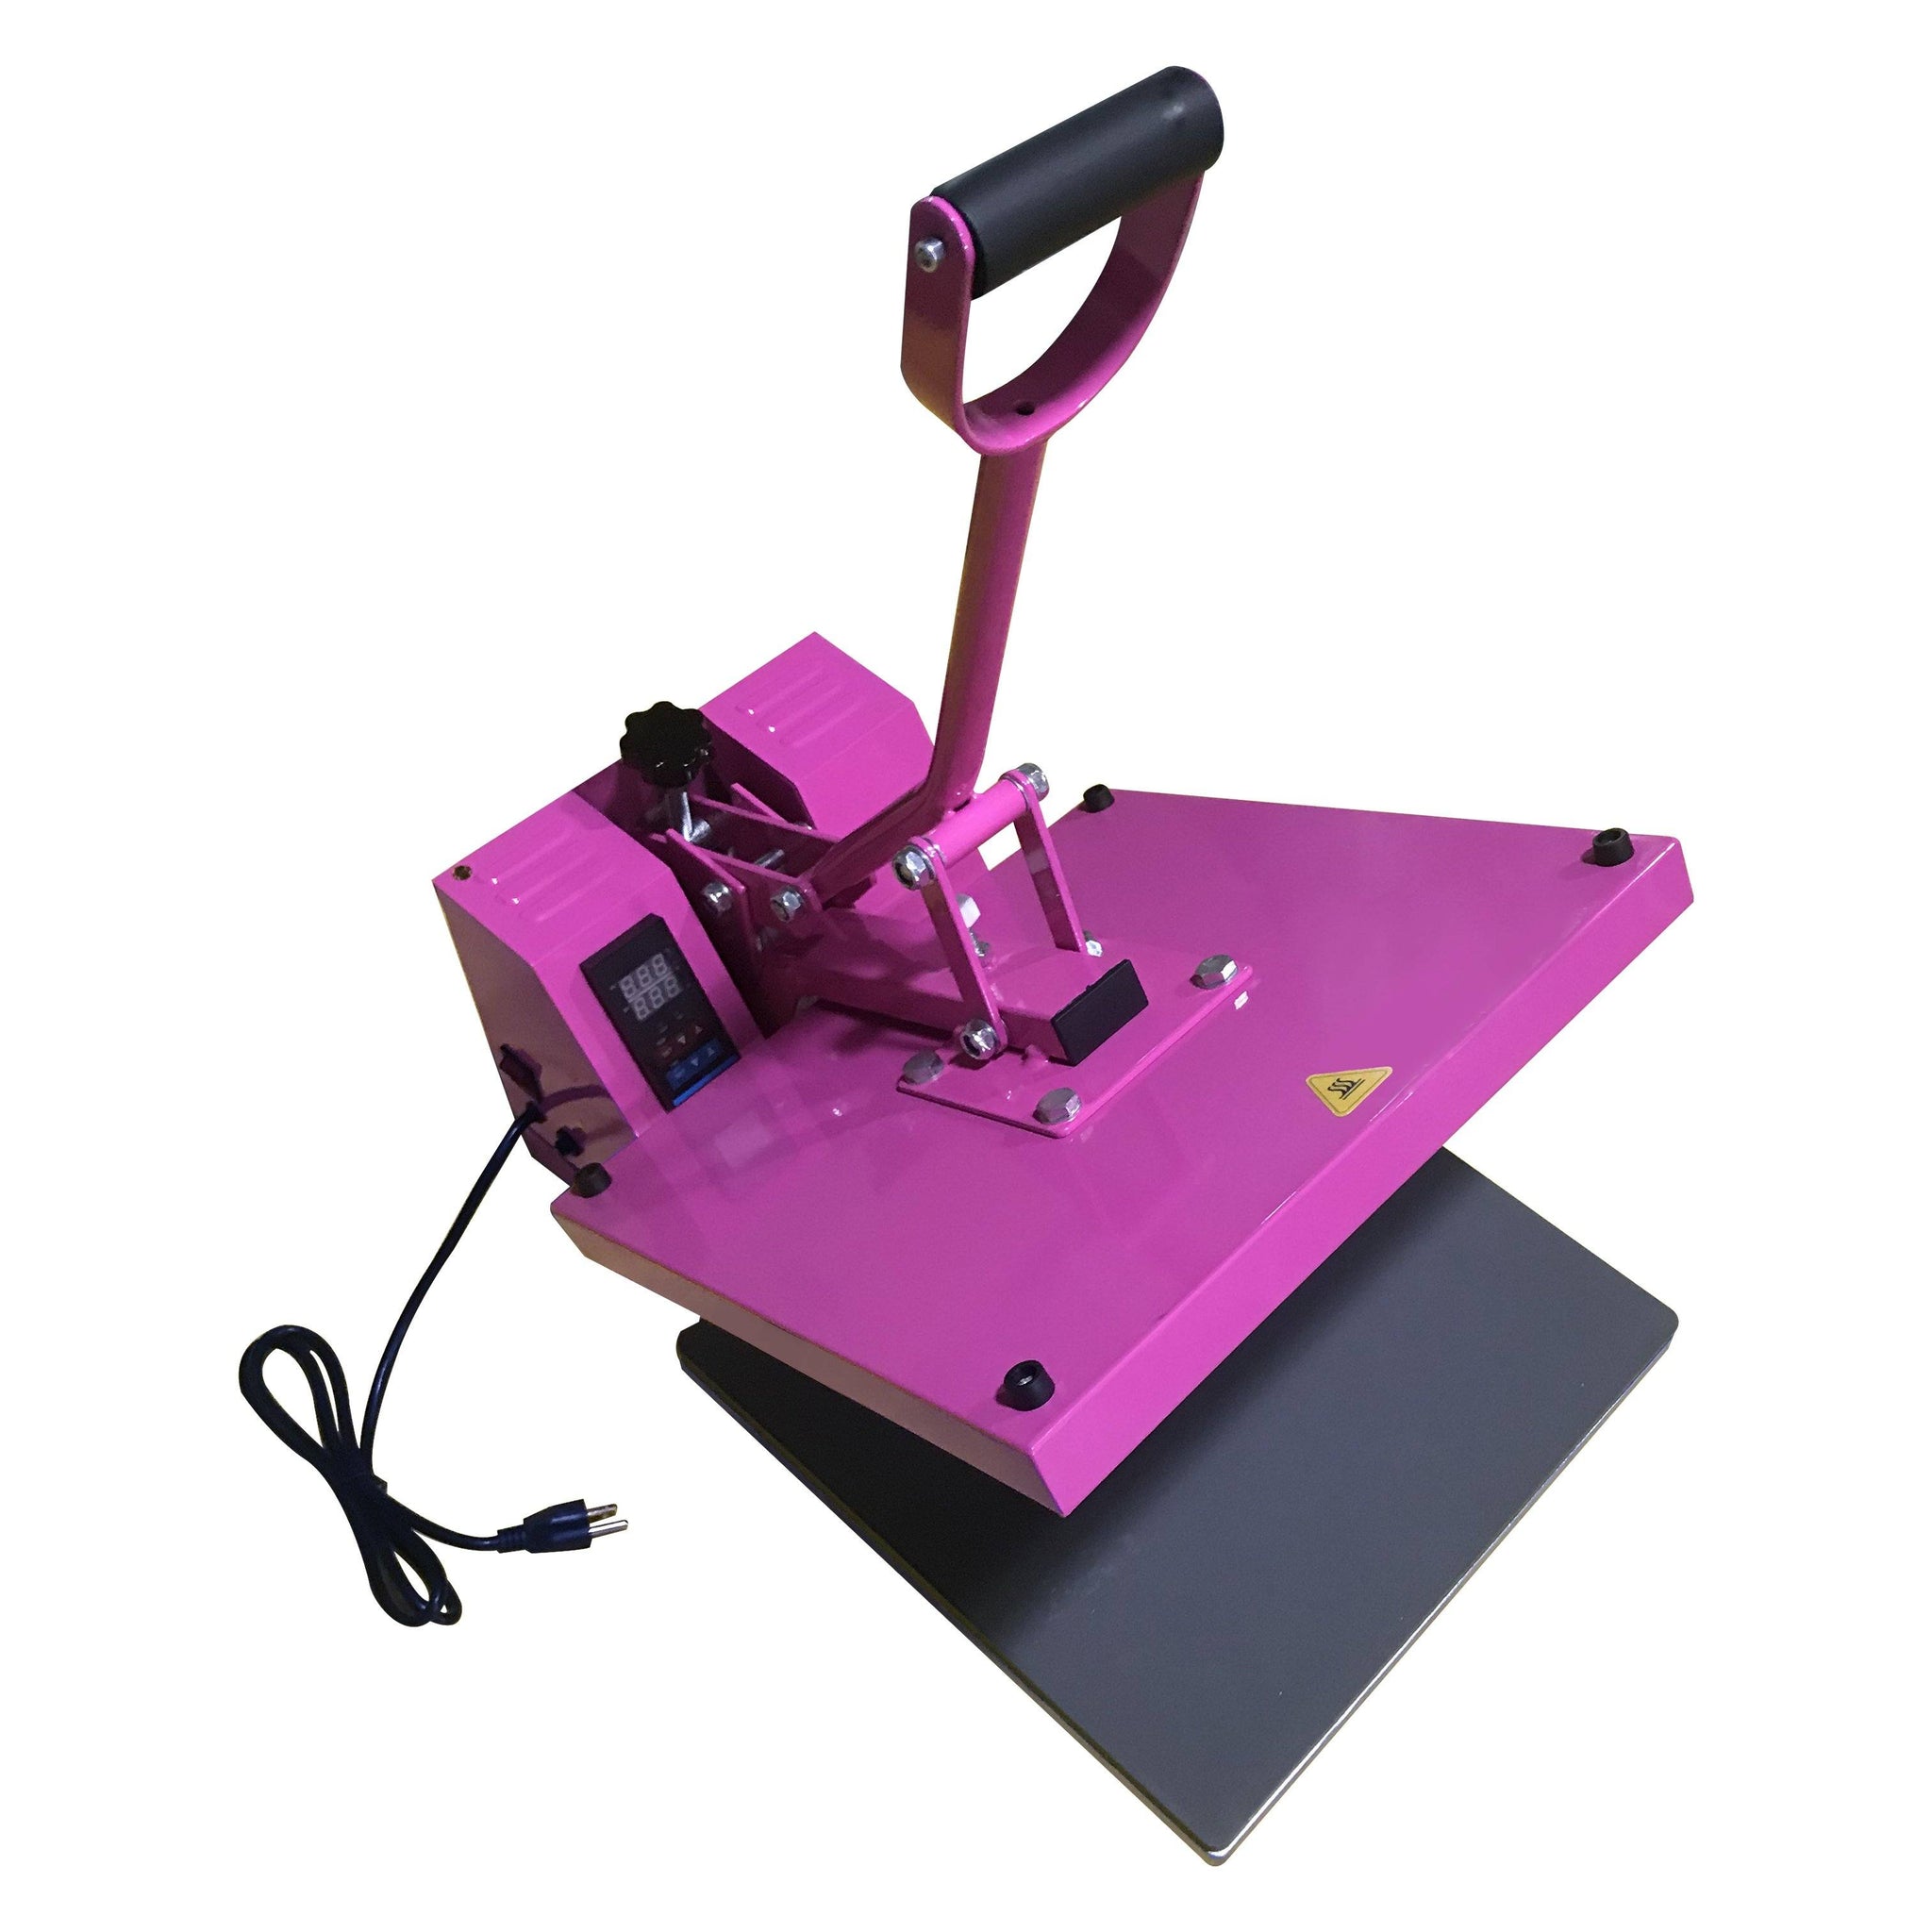 UOKRR Clamshell Heat Press Machine for T Shirts,15 x 15 Portable Heat  Press for Sublimation/HTV(Heat Transfer Vinyl)-No Pressure Knob for Home